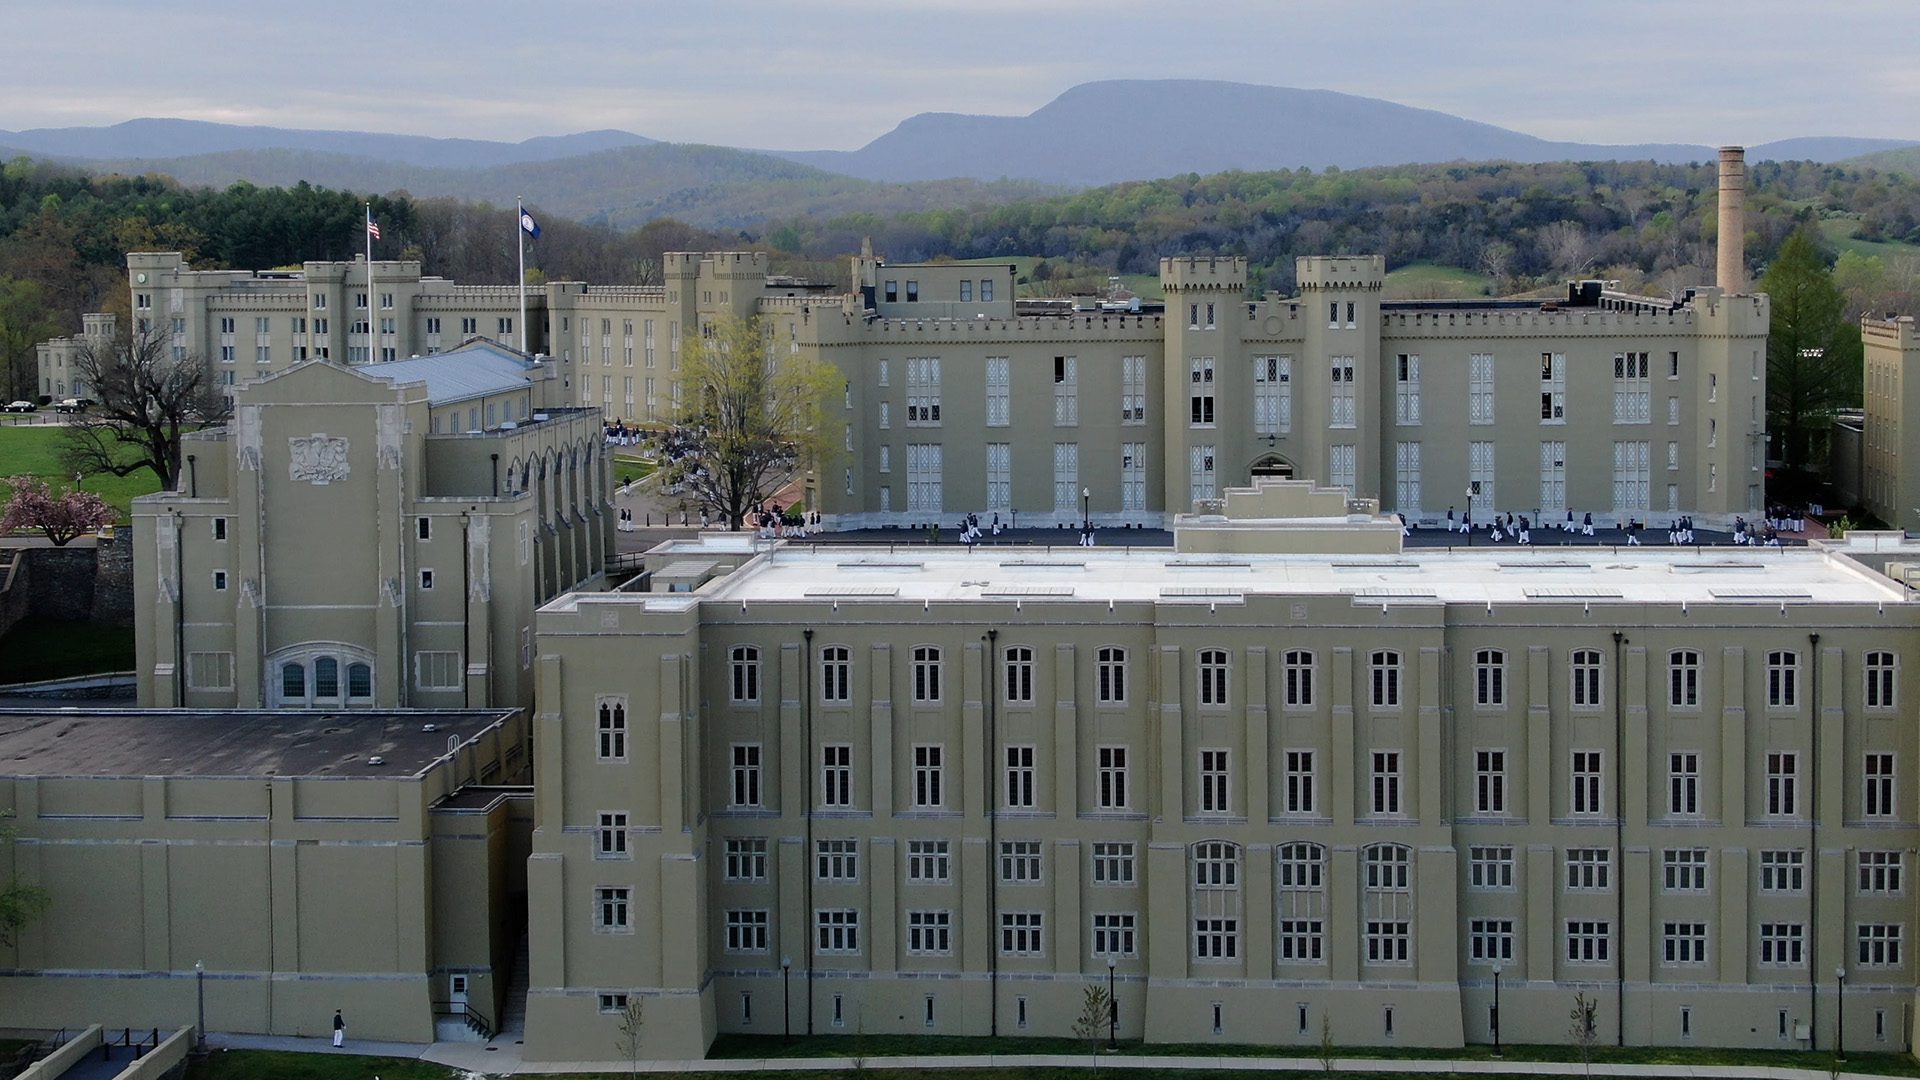 aerial shot of the side of barracks with mountains in background